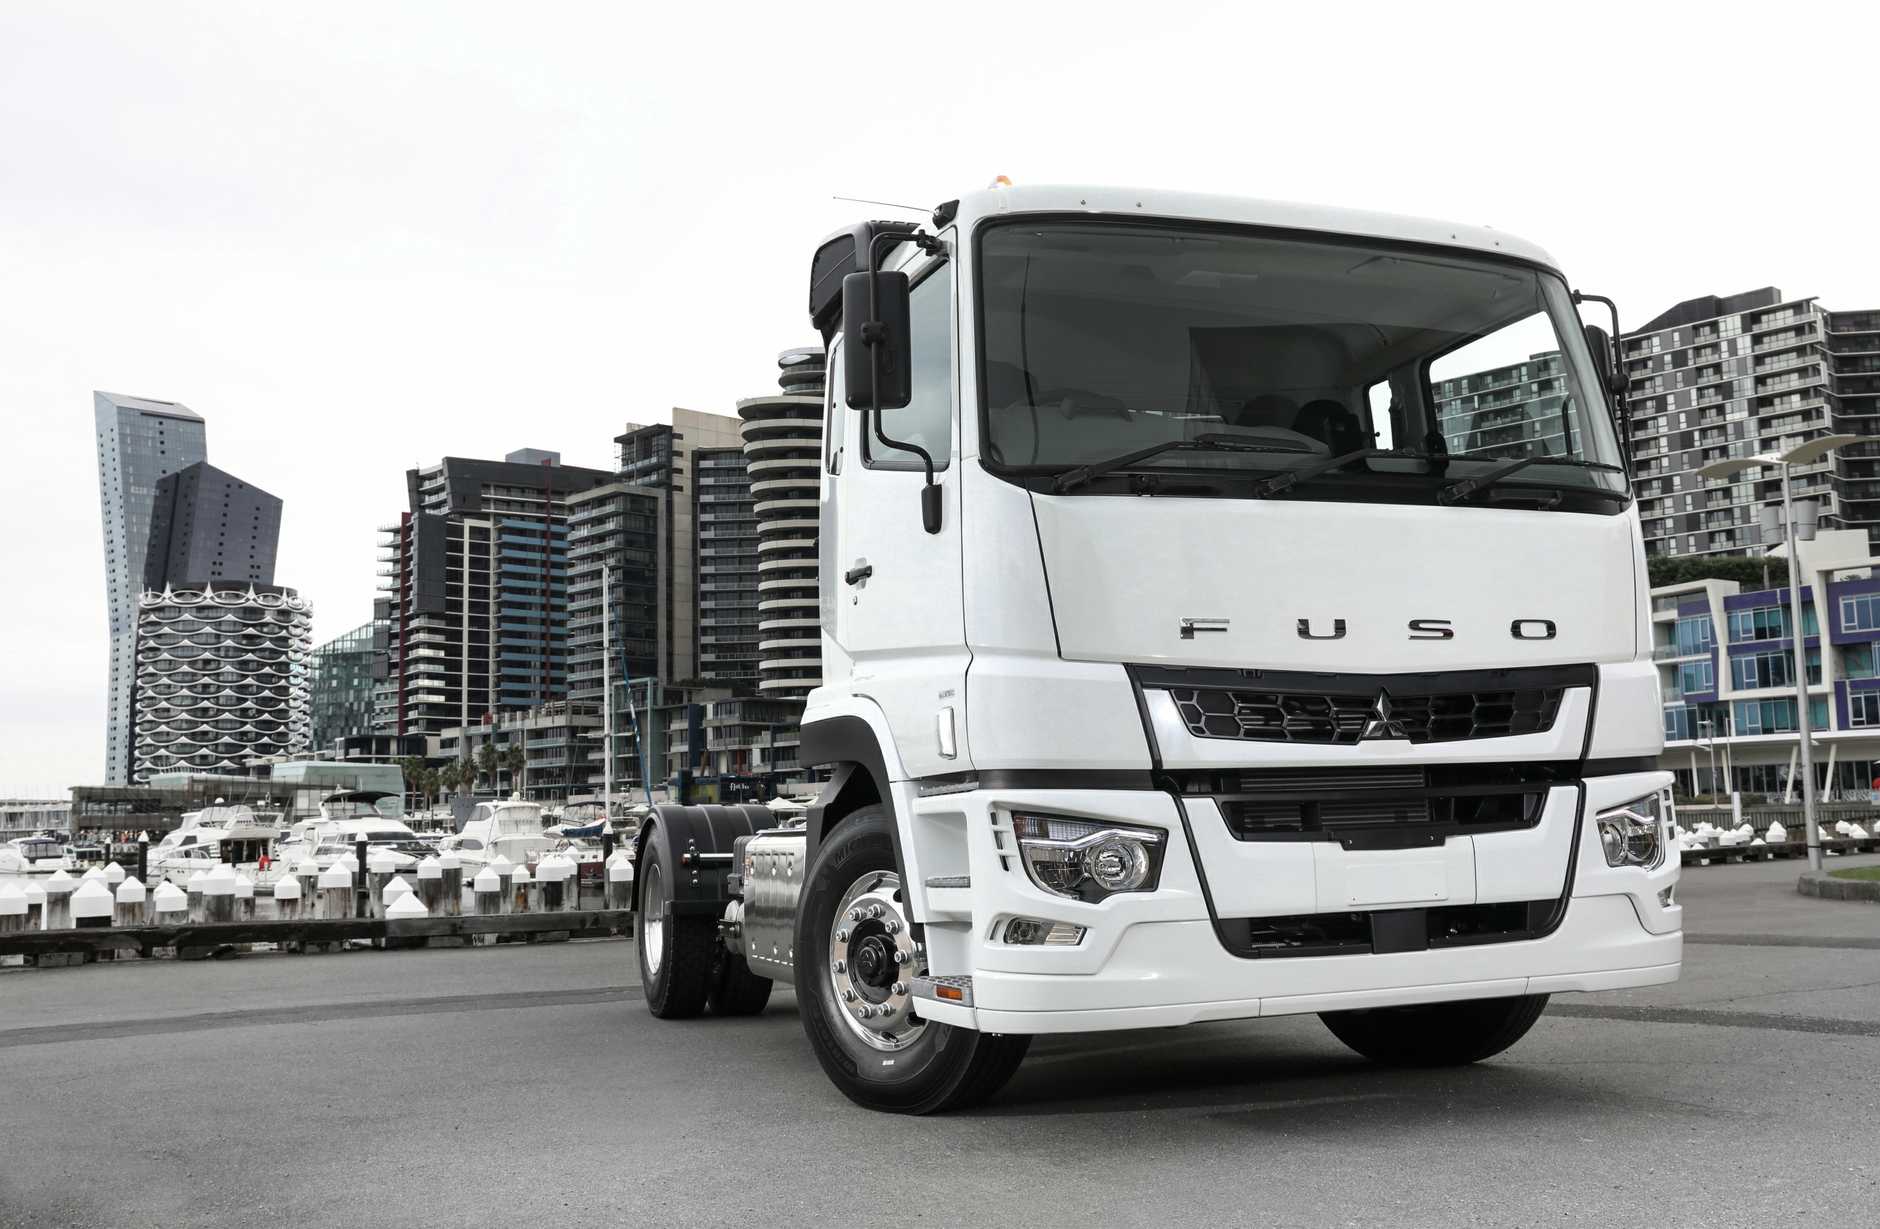 Fuso Shogun takes the lead in Australia by introducing